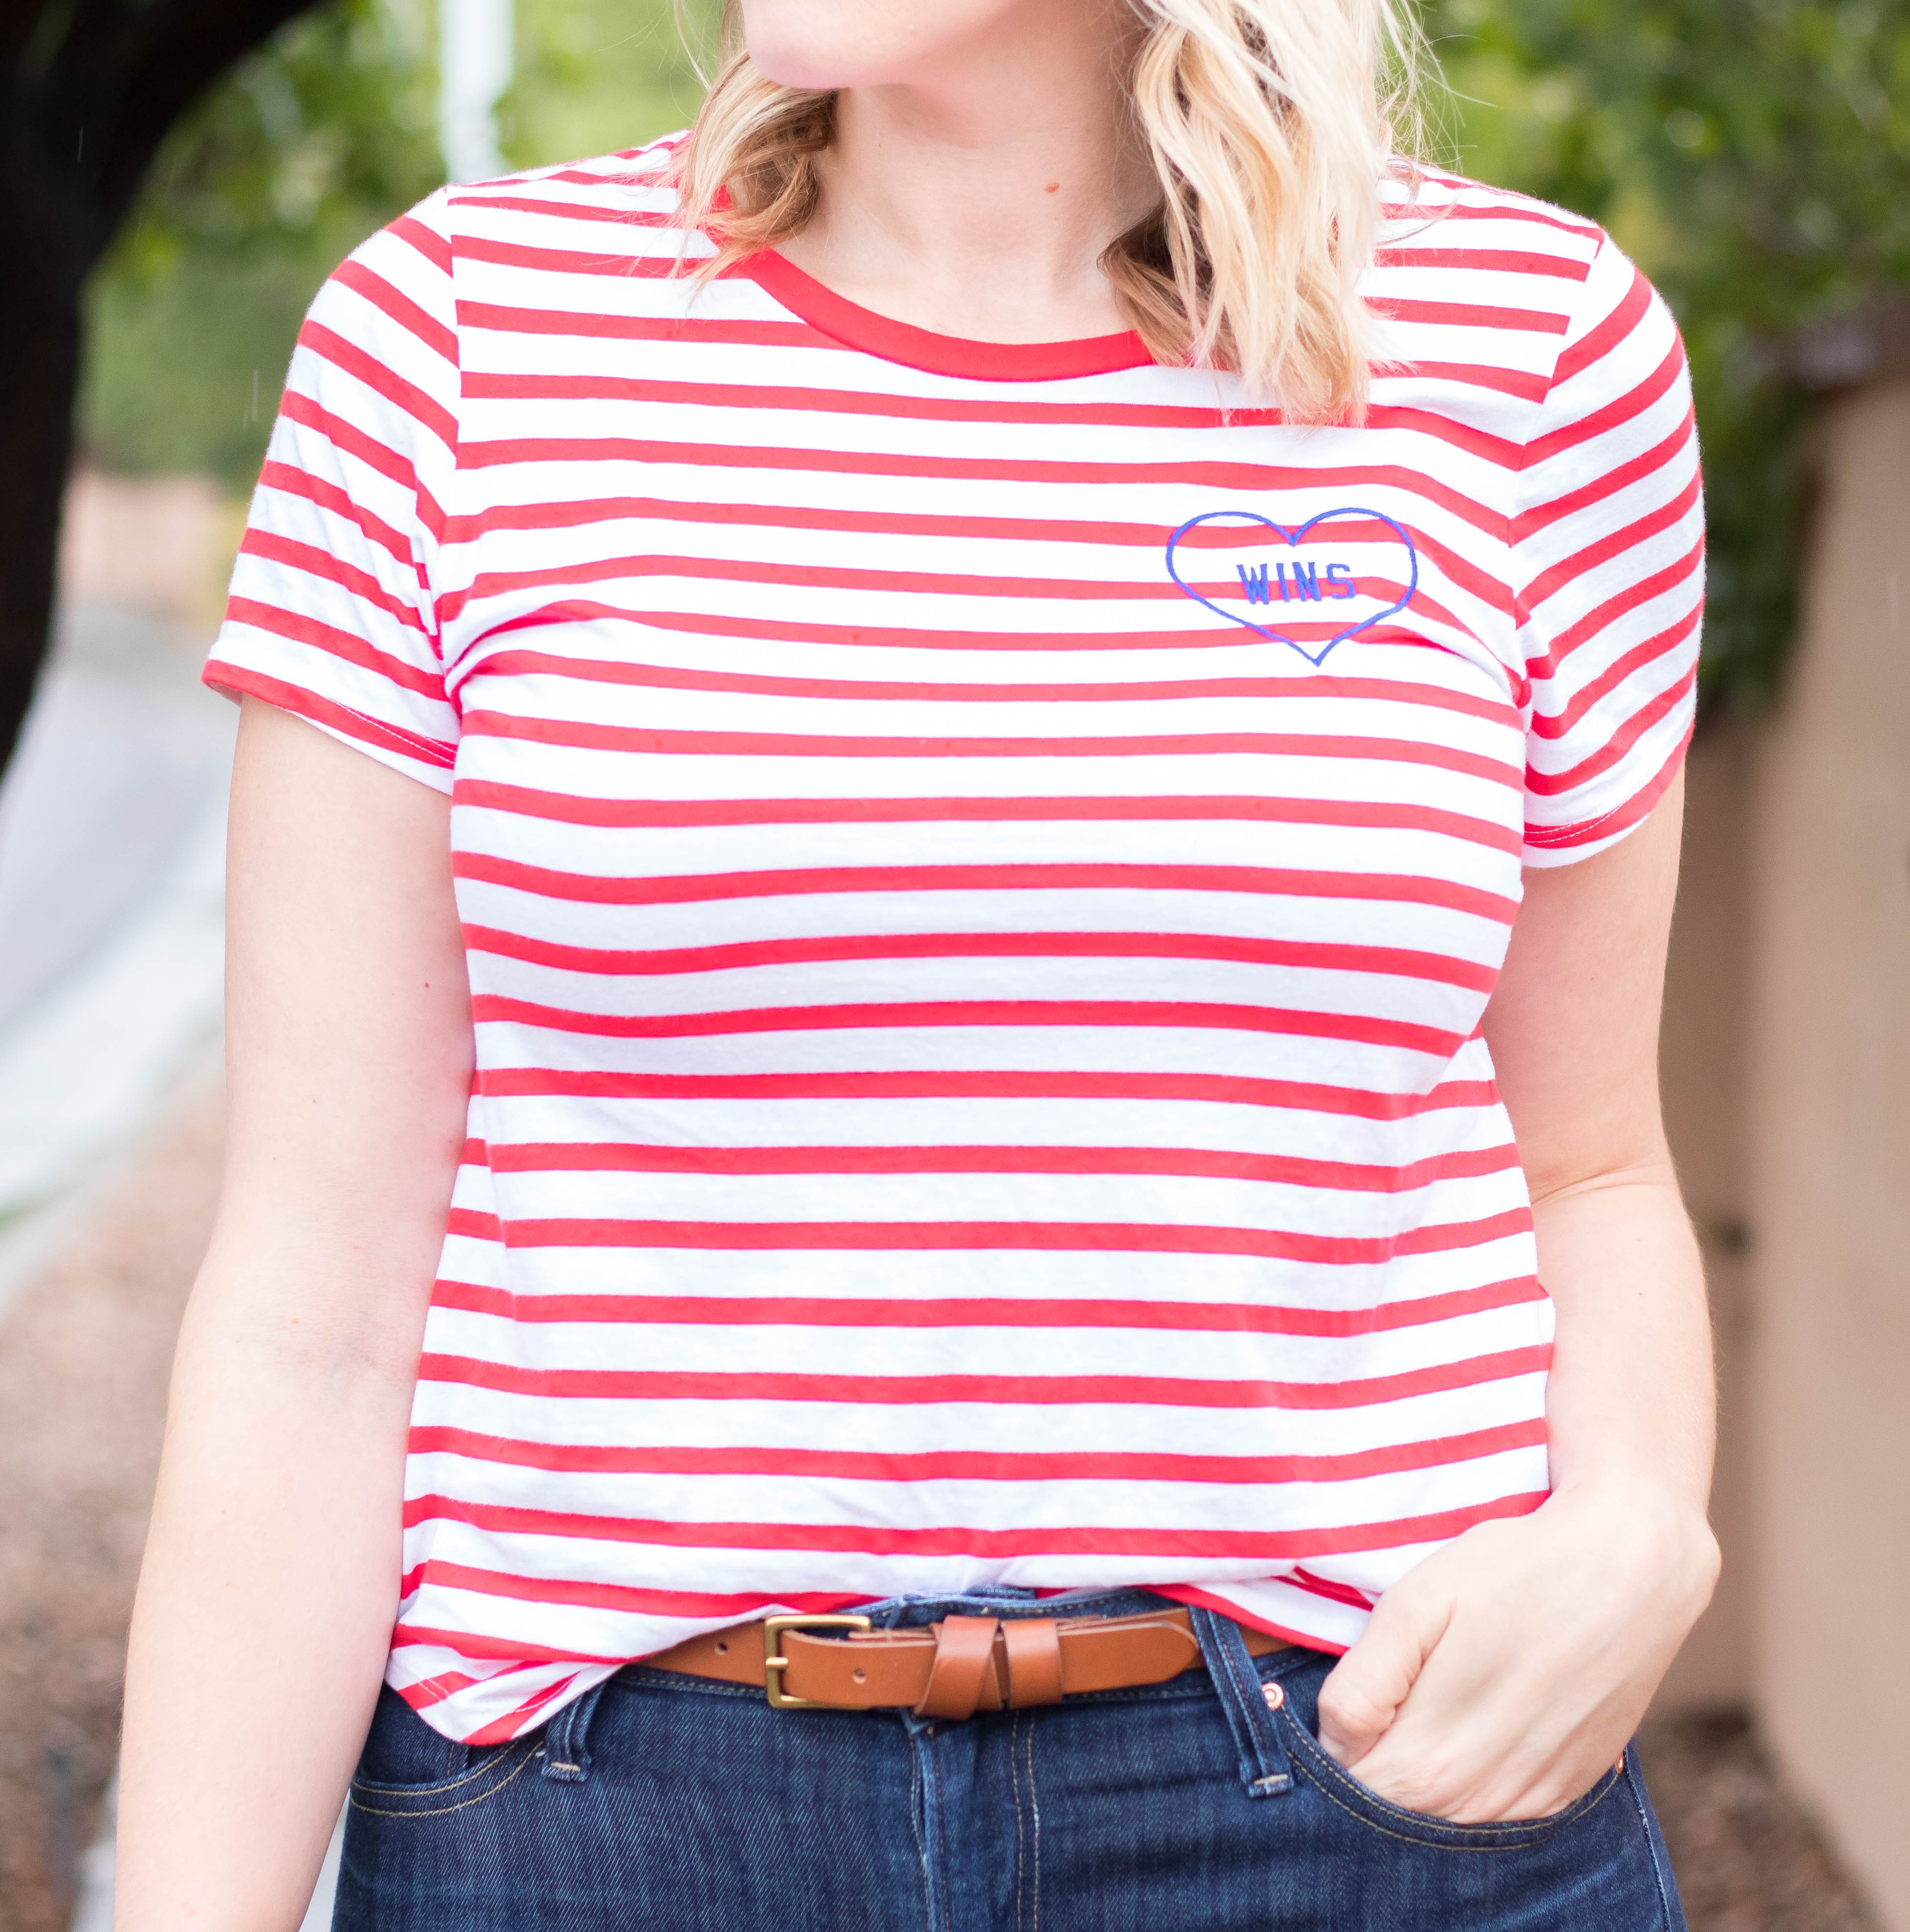 graphic striped tee old navy #lovewins #oldnavystyle #fallfashion #momstyle